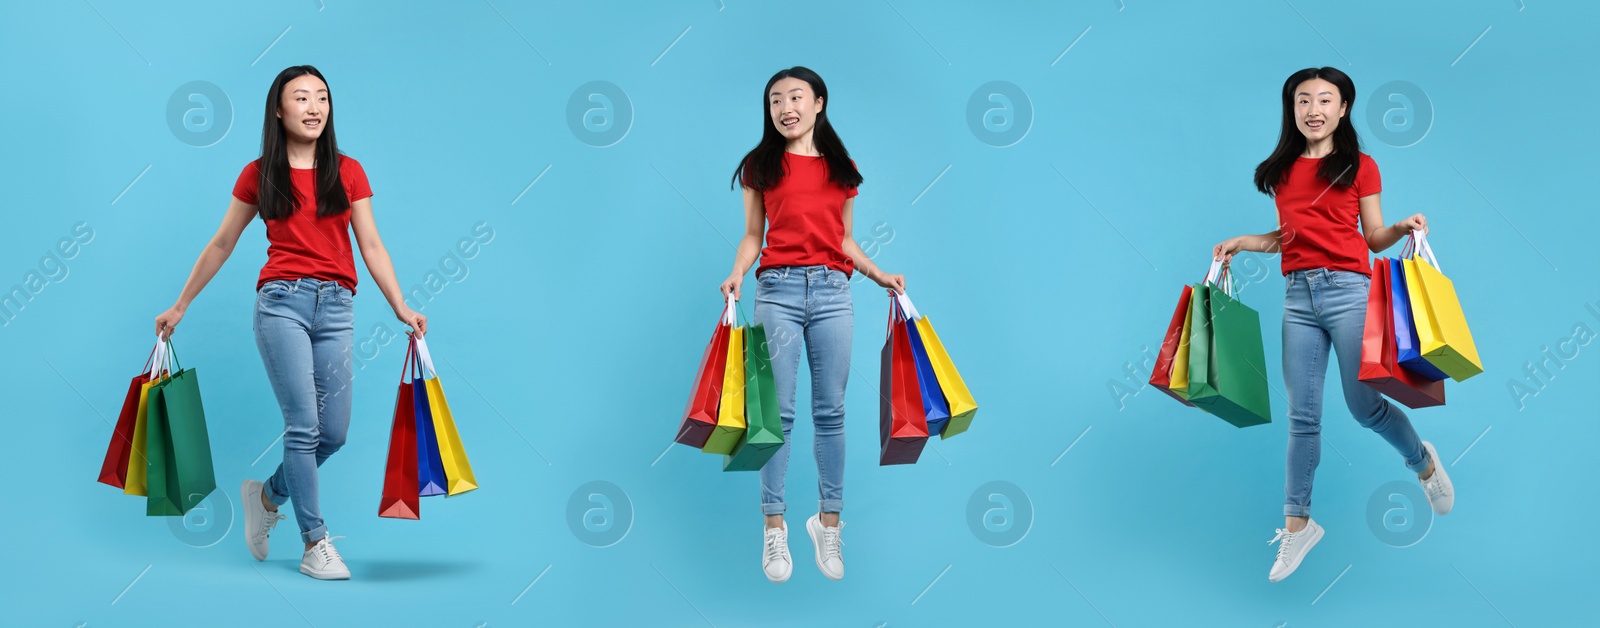 Image of Woman with shopping bags on light blue background, set with photos